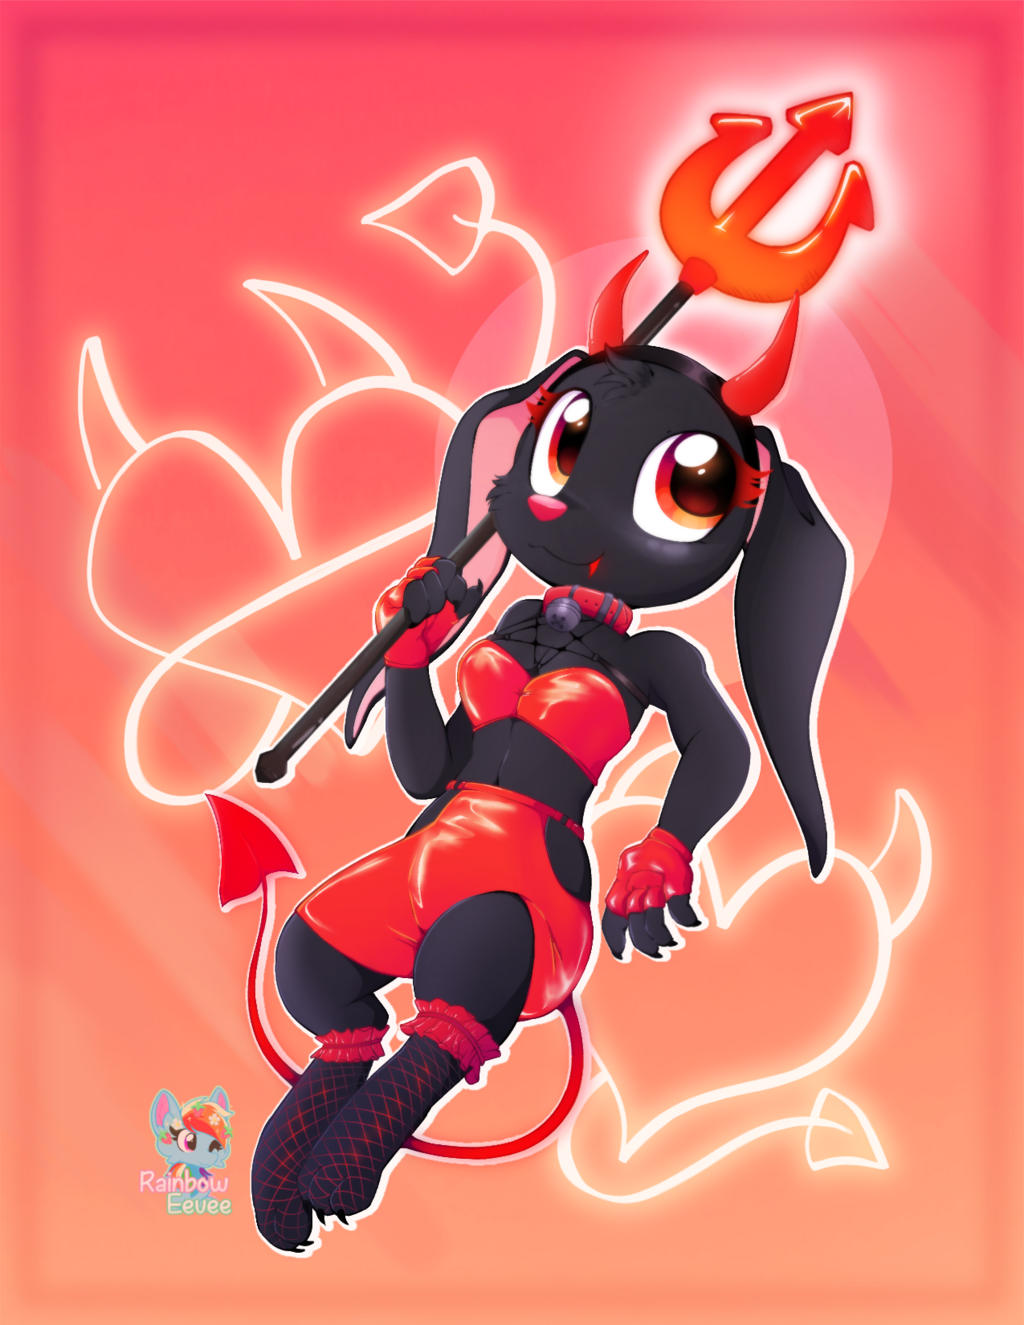 Devil Outfit by Rainbow Eevee